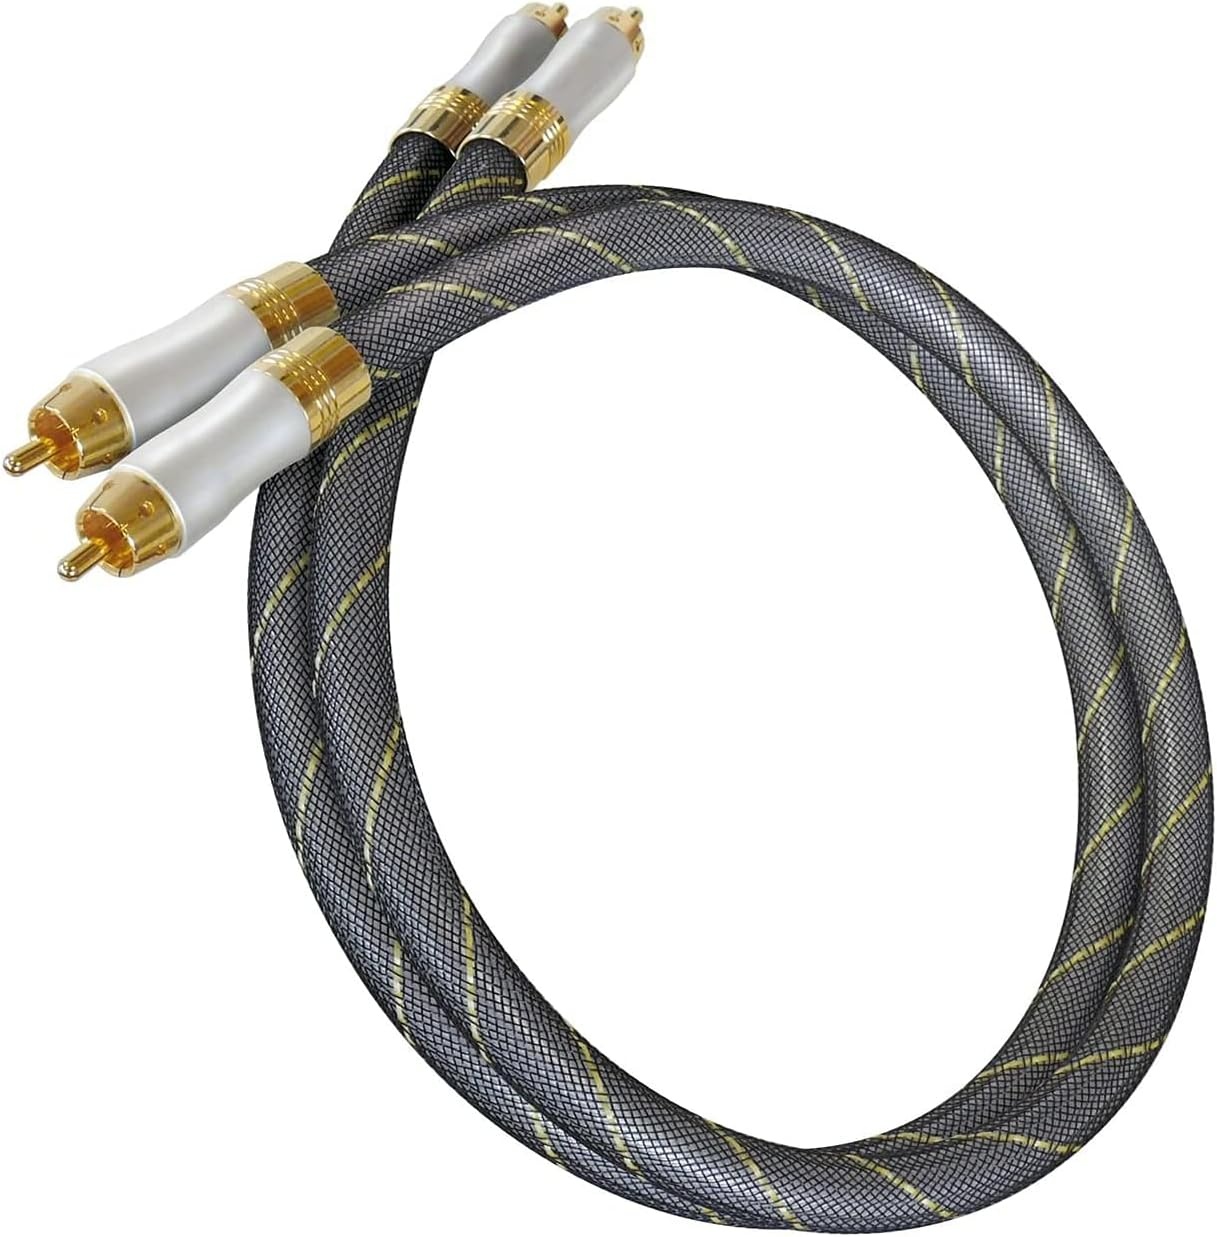 Stereo RCA-RCA Cables